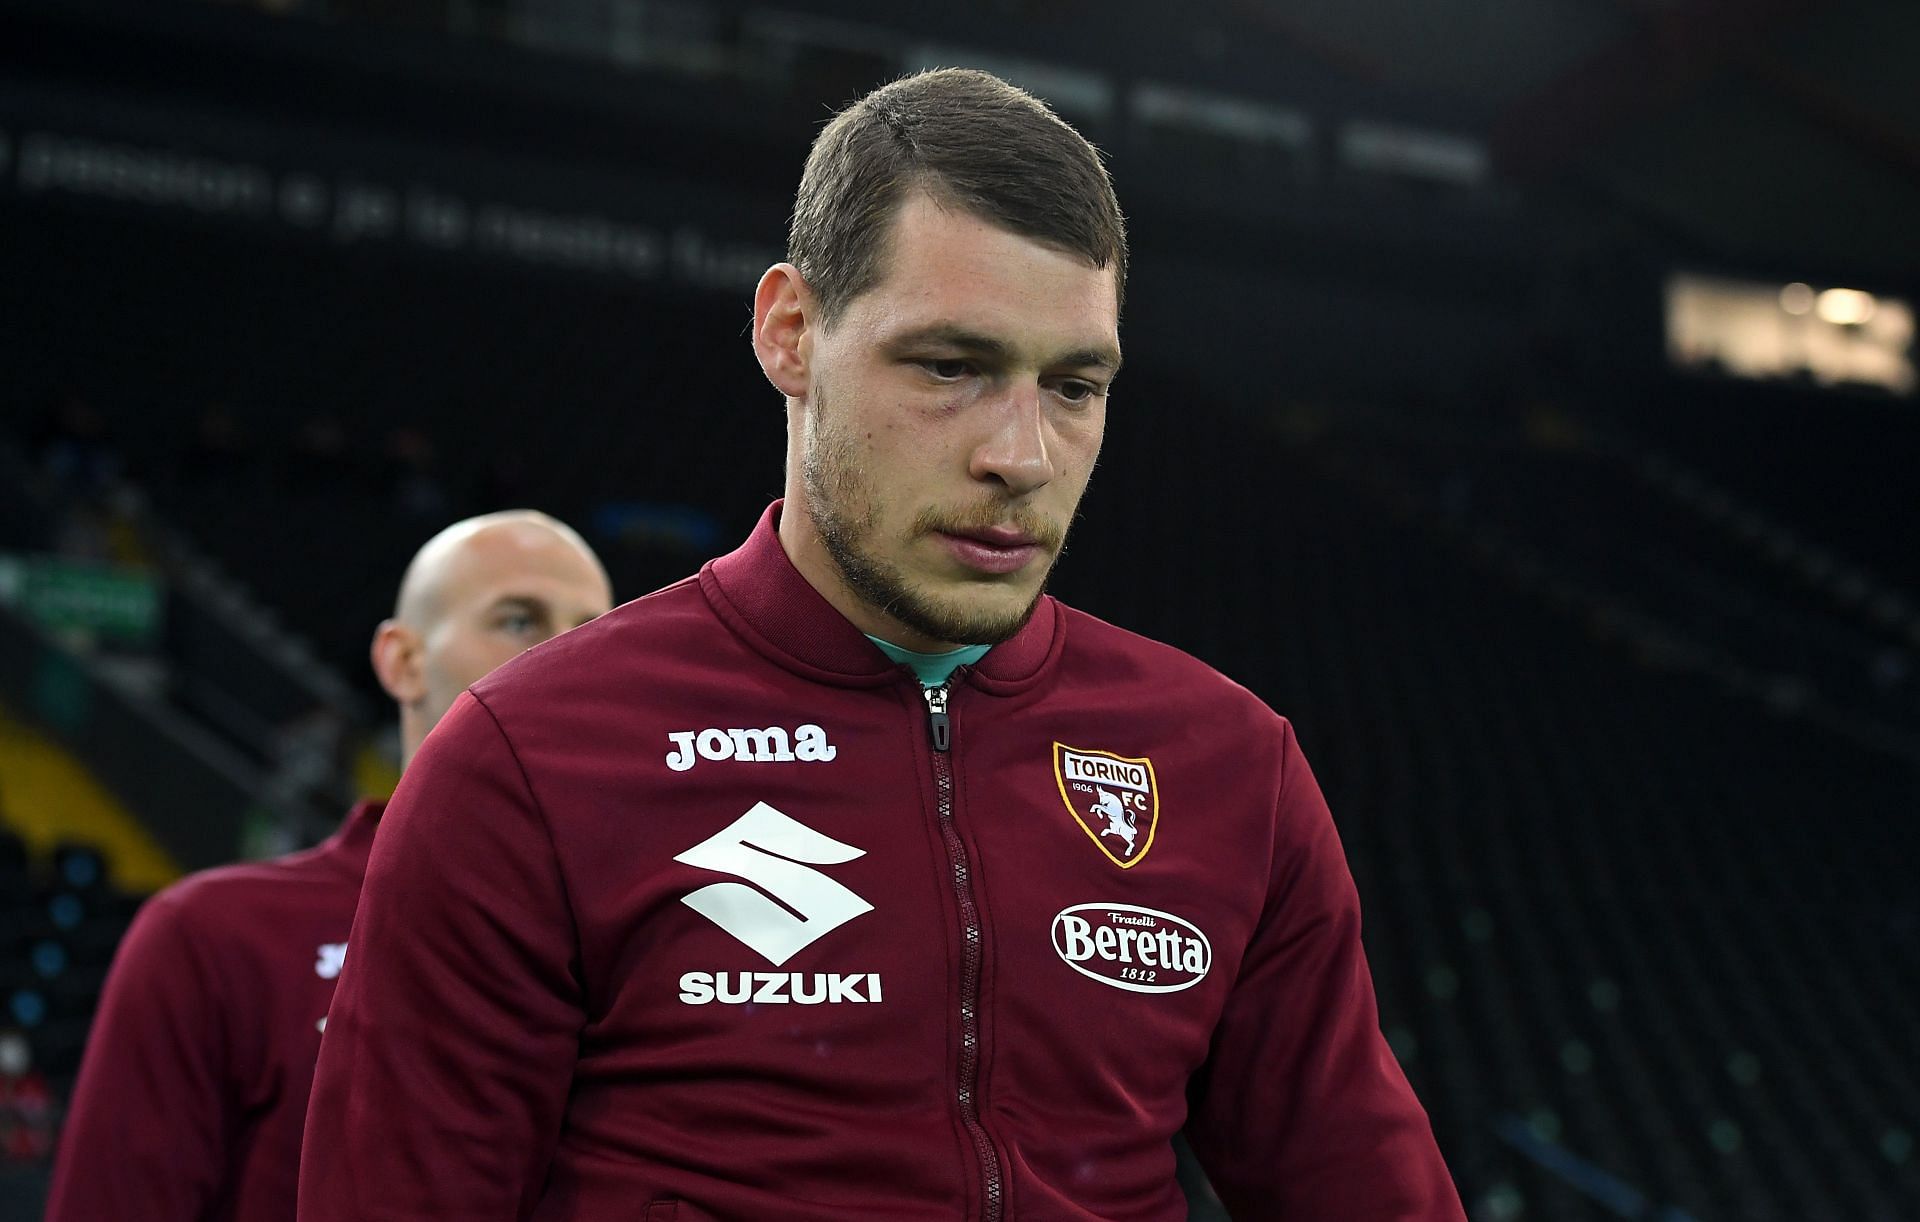 Belotti will be a huge miss for Torino